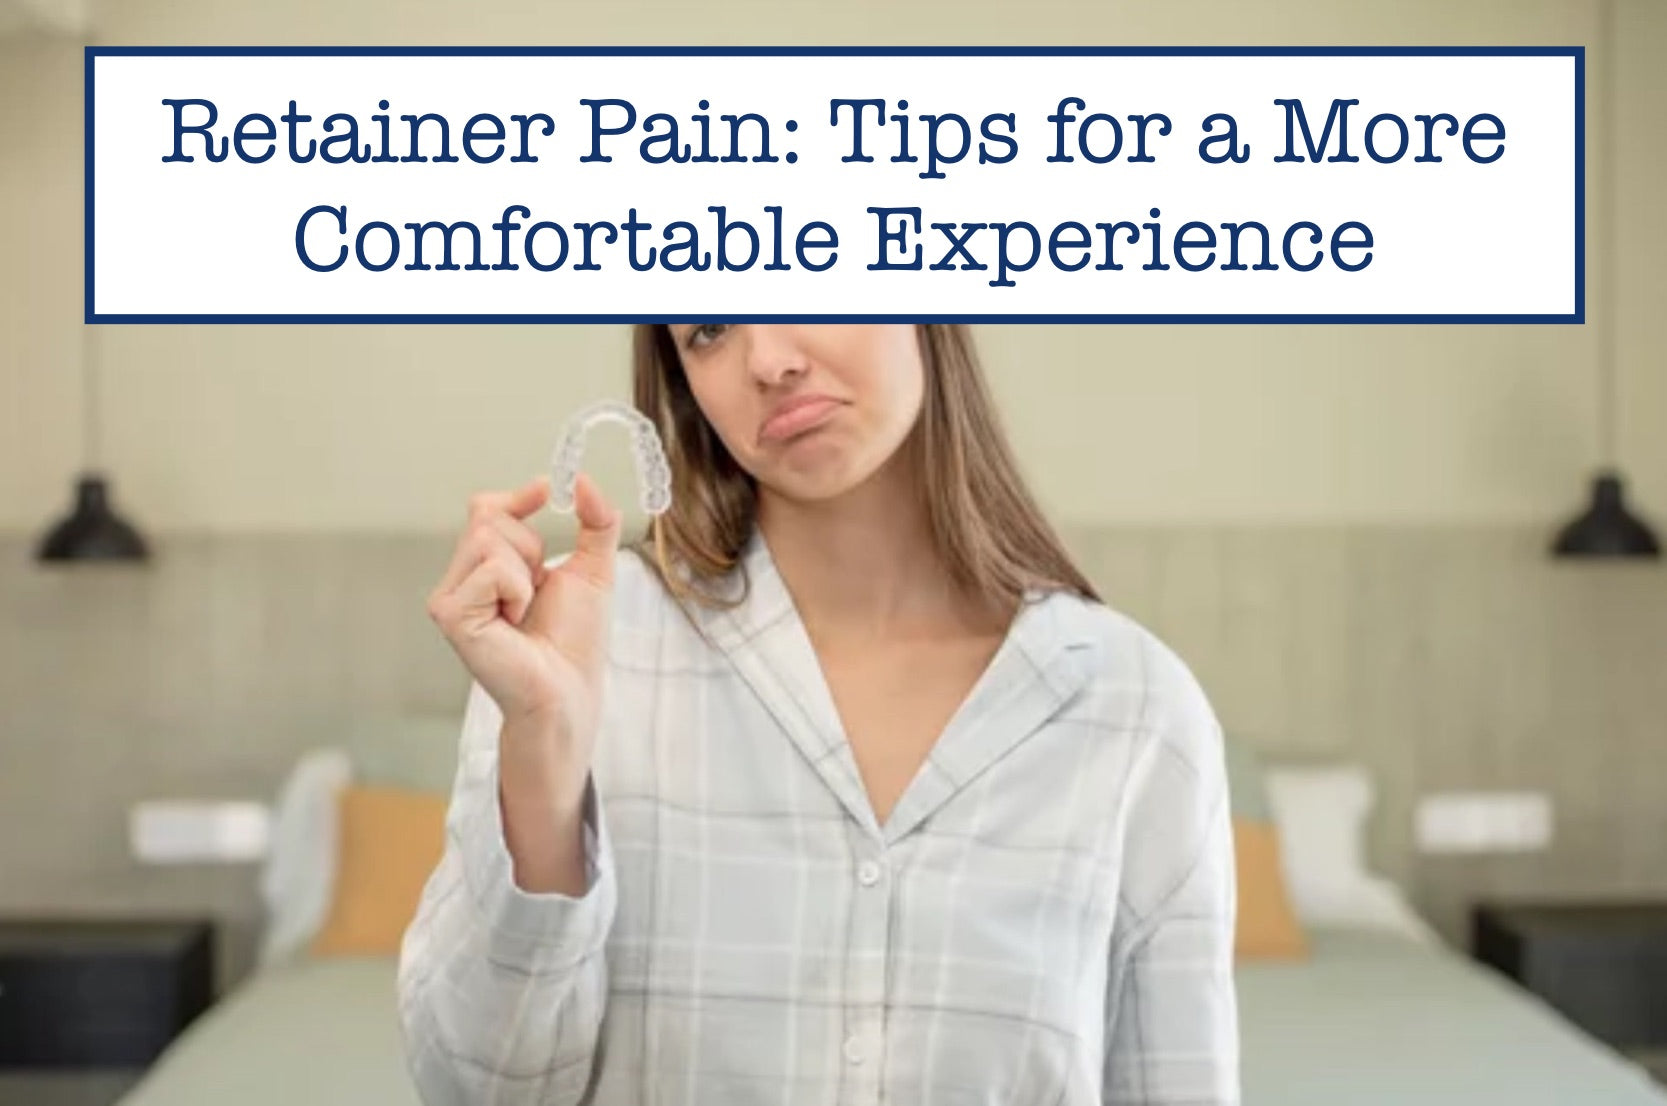 Retainer Pain: Tips for a More Comfortable Experience